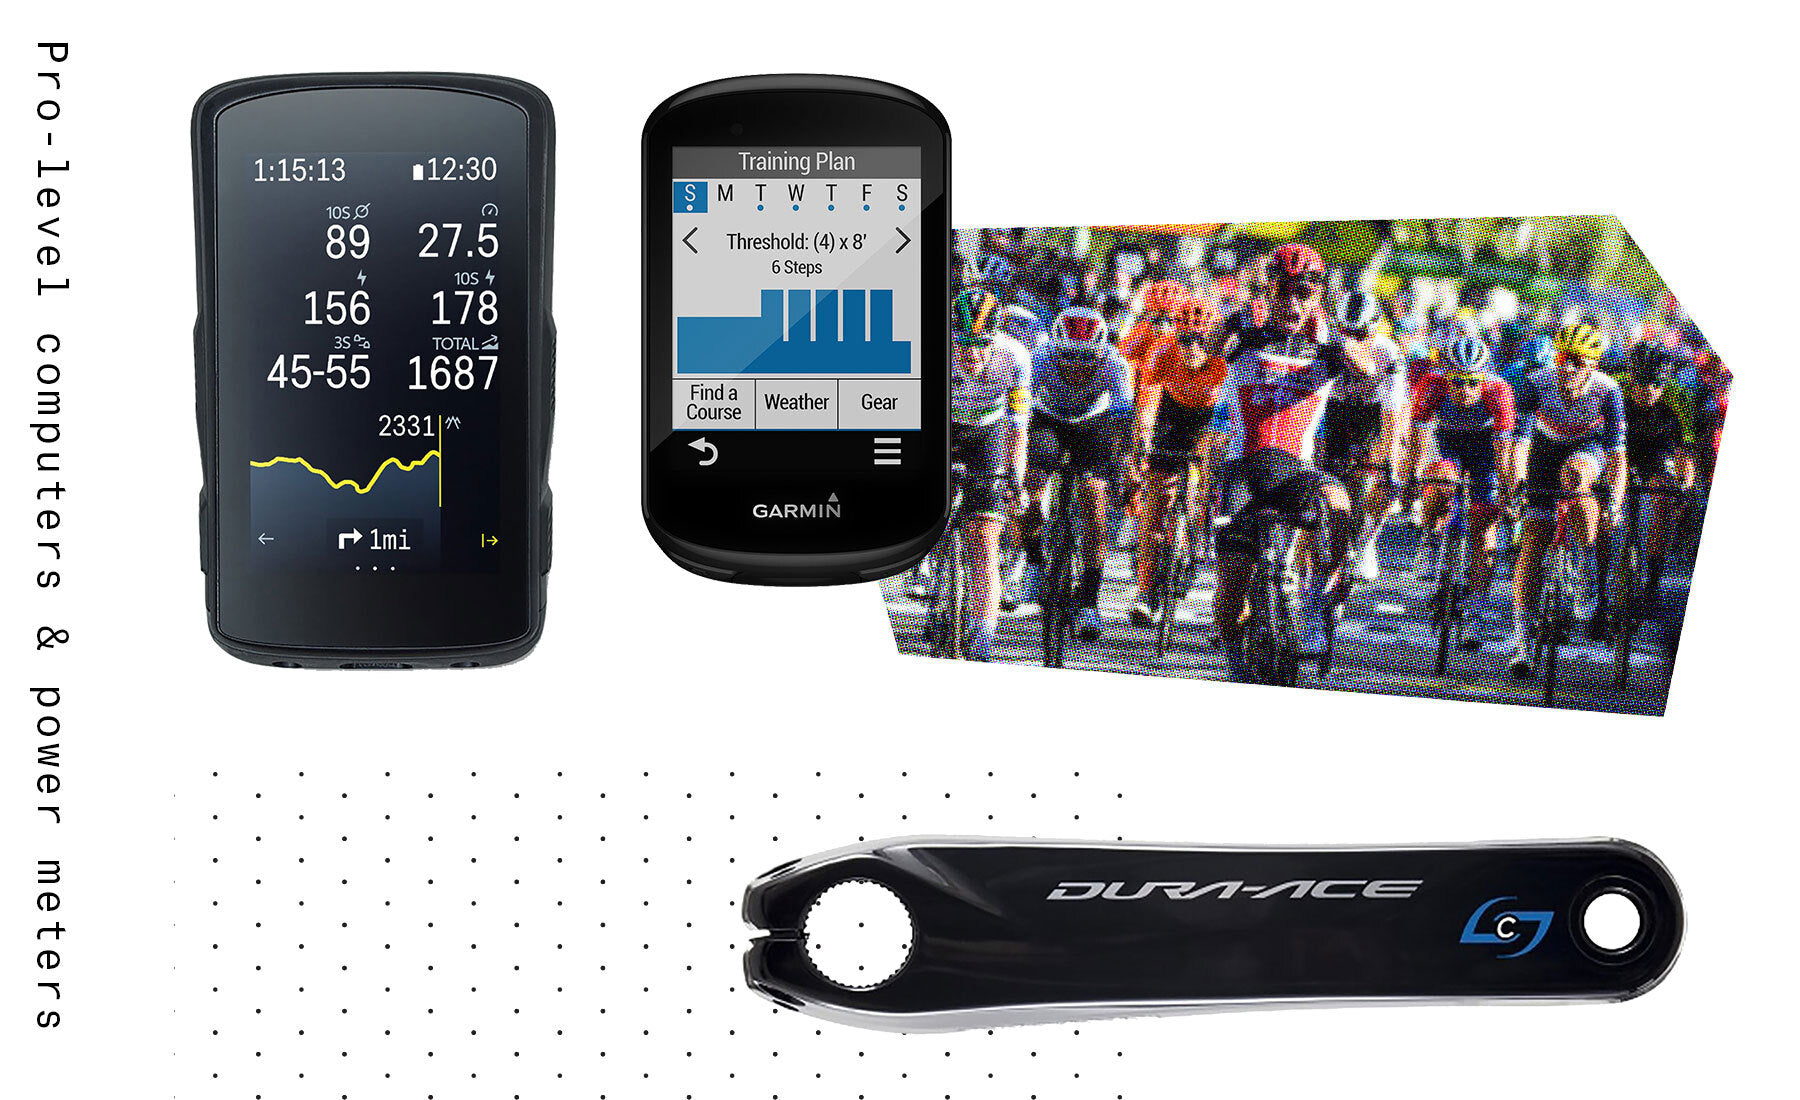 Tour de france pro level cycling computers and power meters for sale